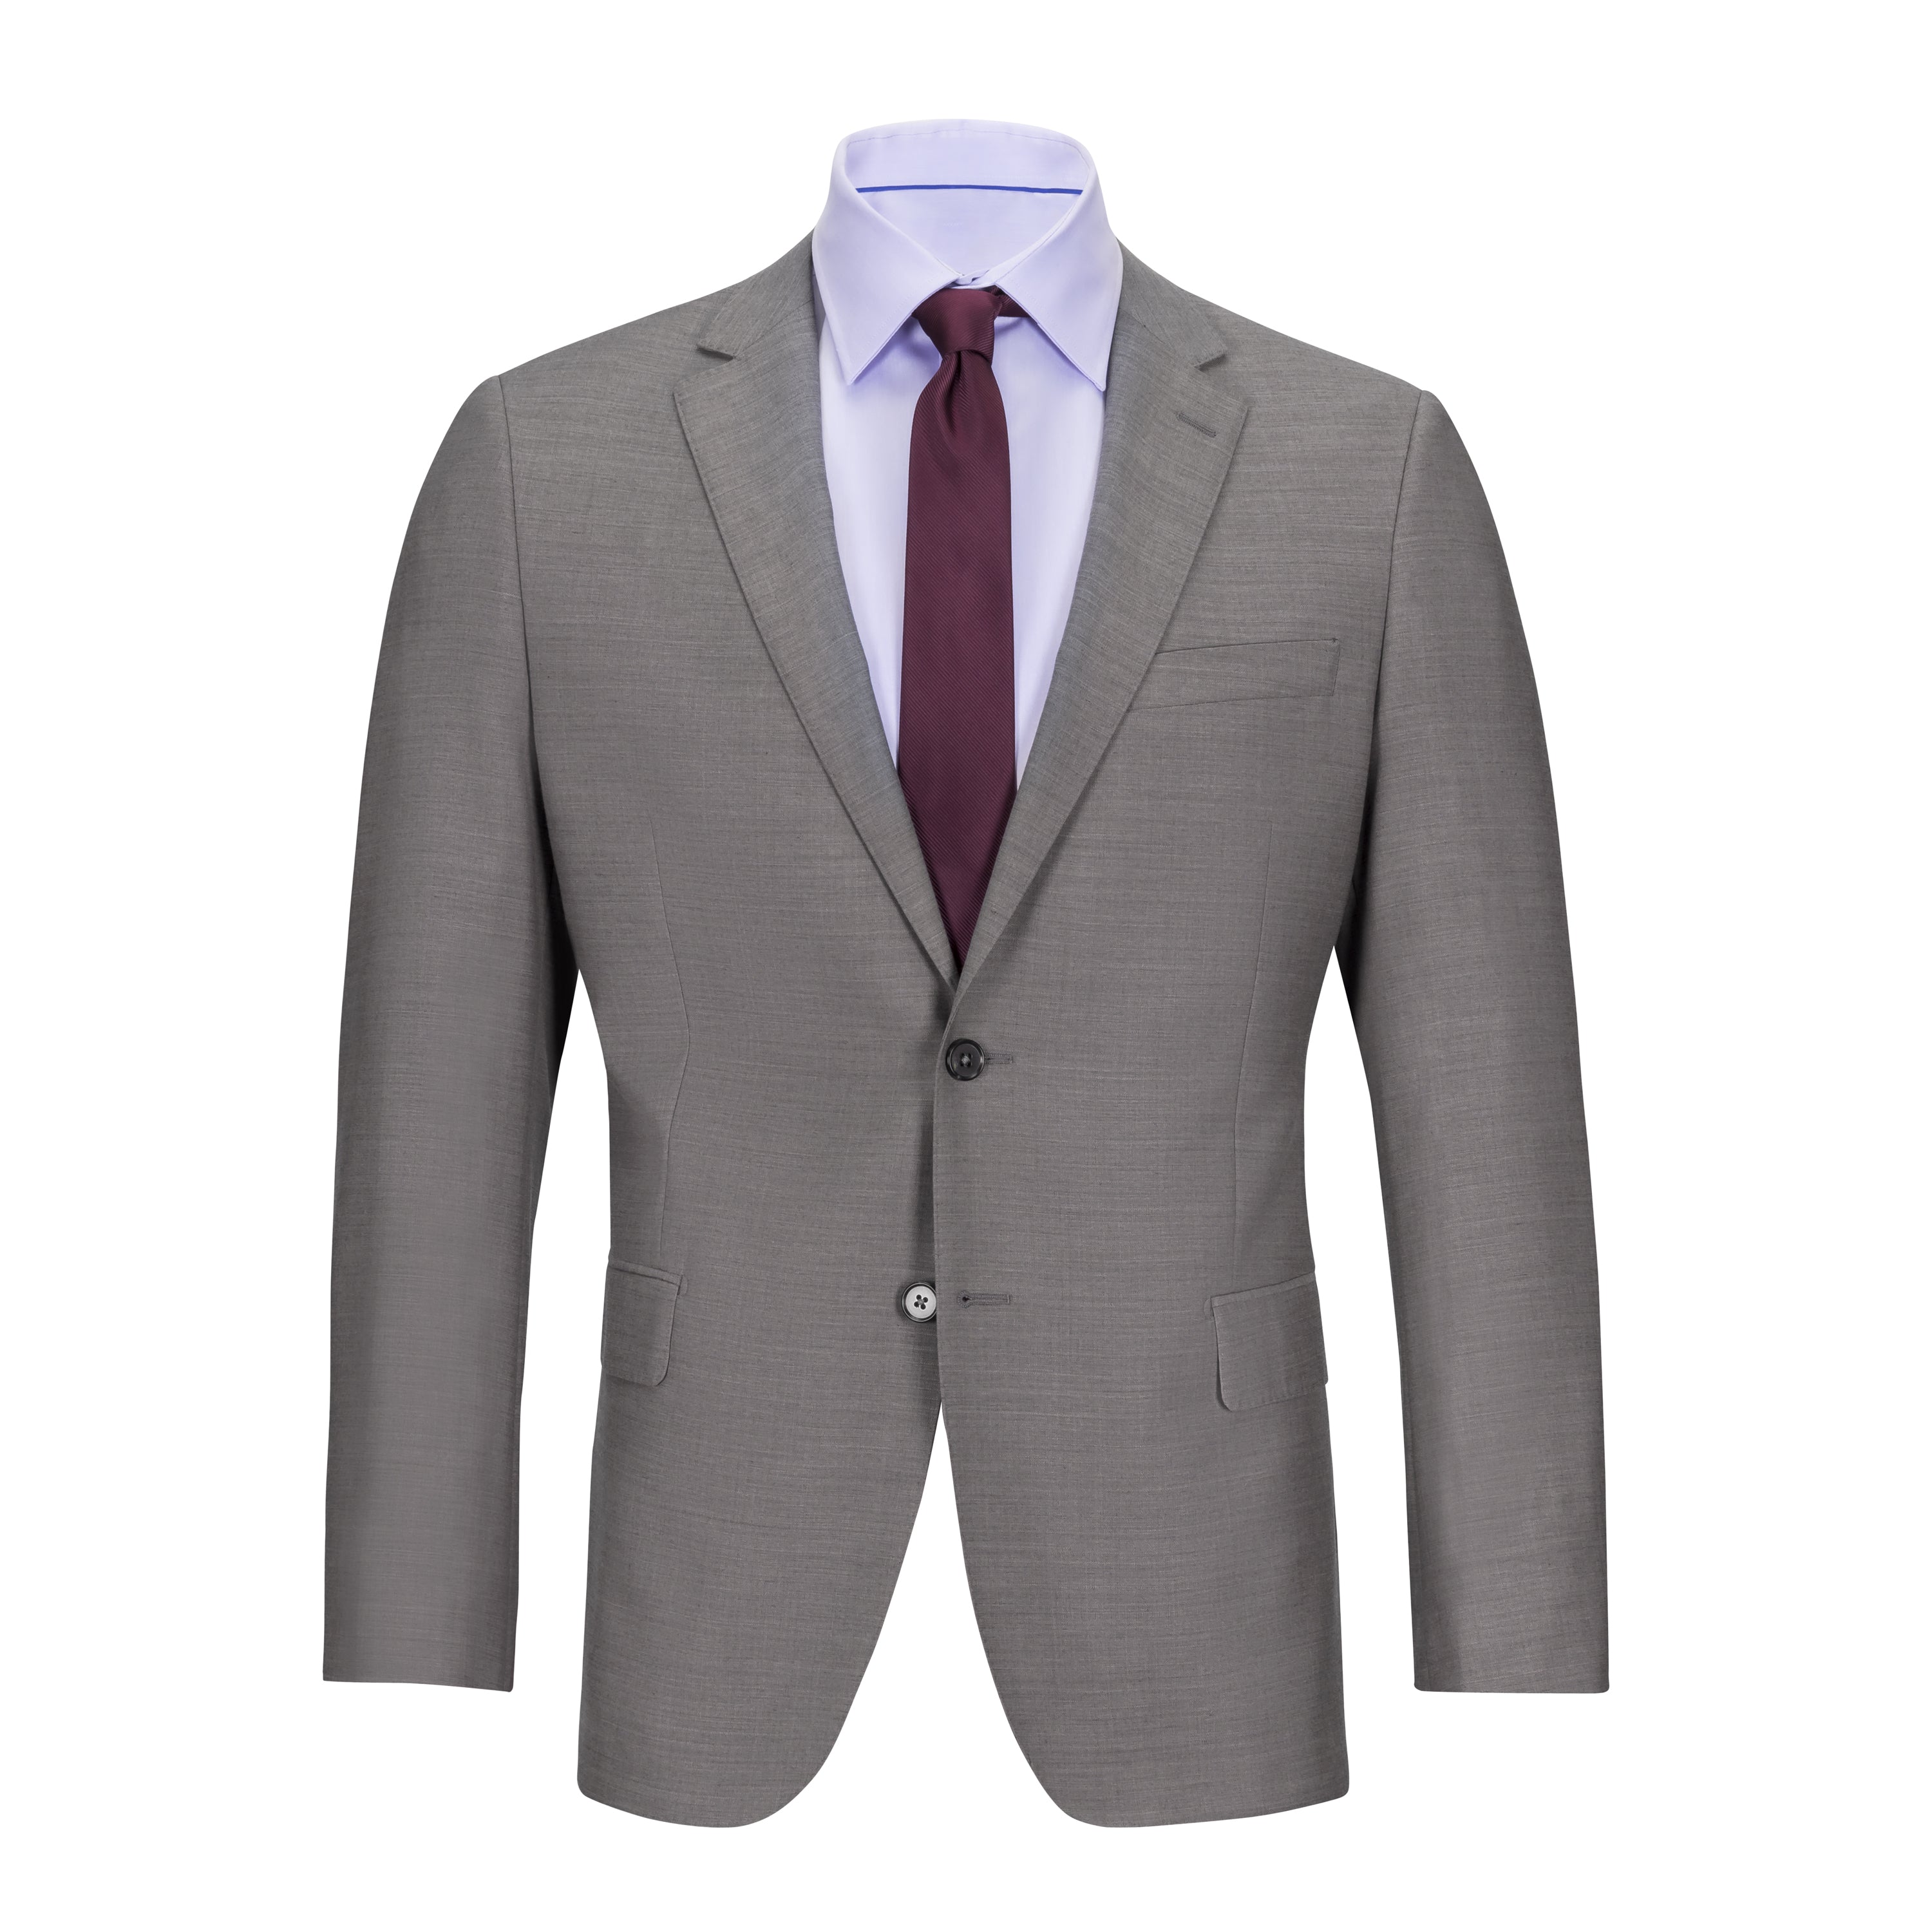 Miltons SUIT Store colors) SLIM FIT The TIGLIO for WOOL Men – (more -